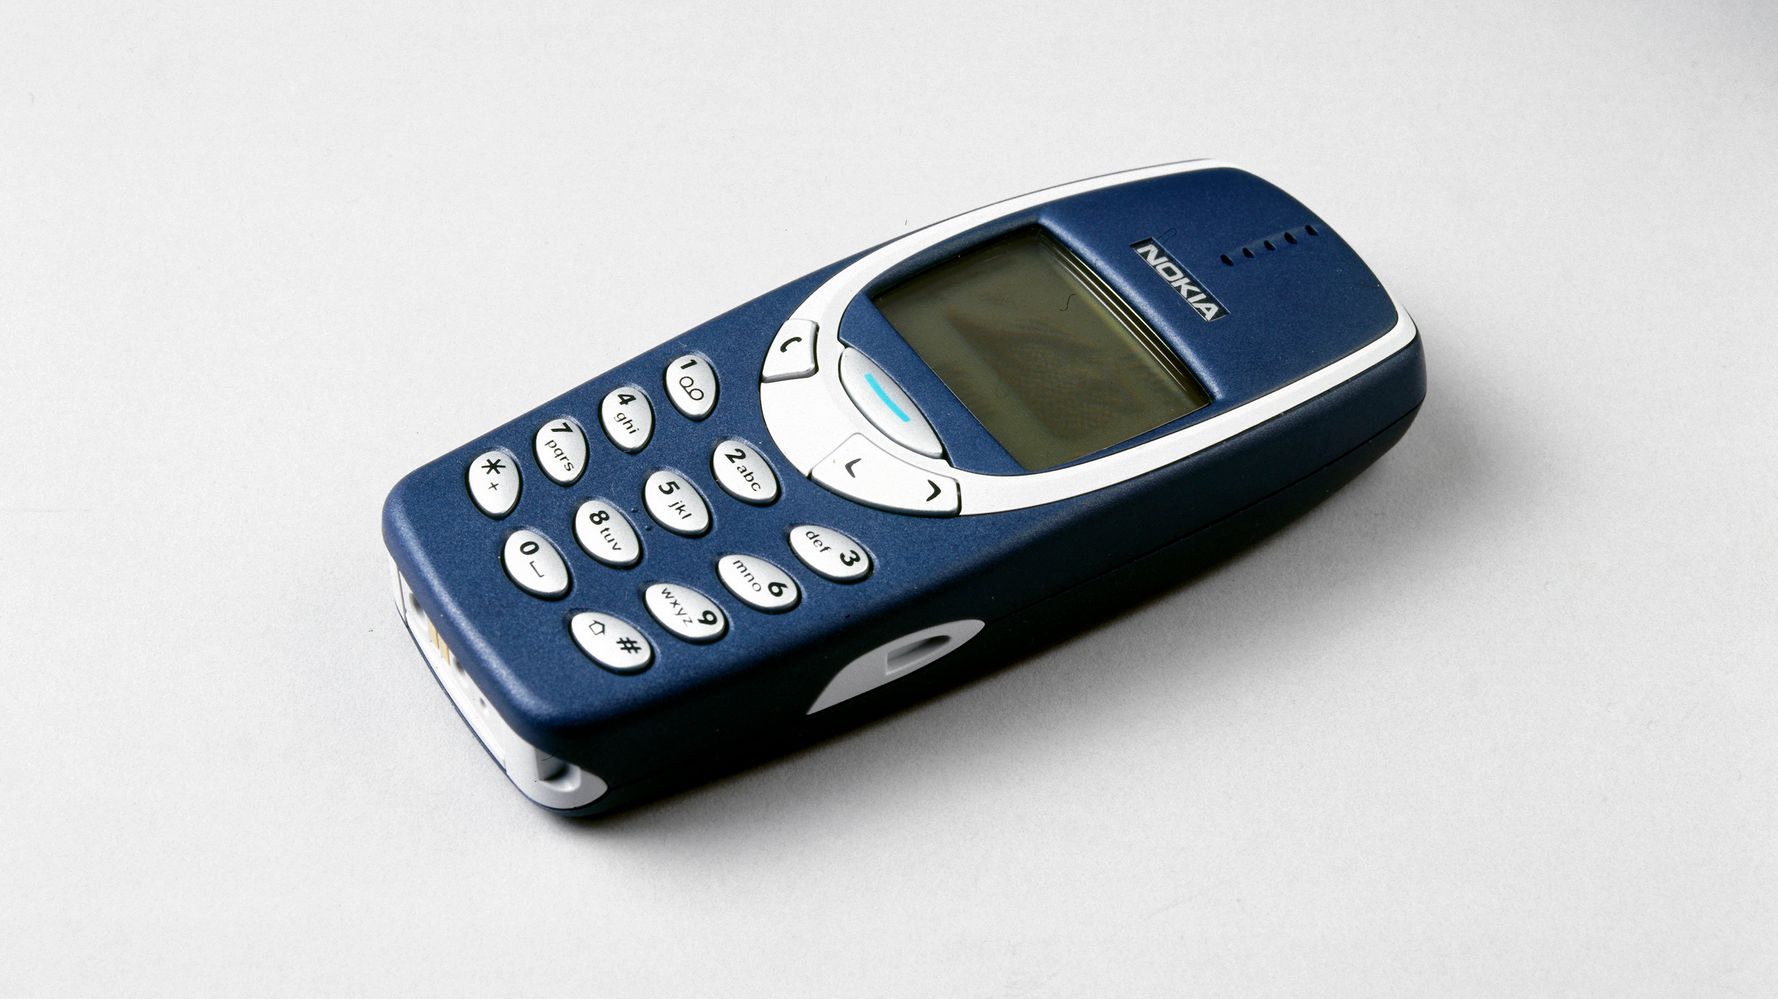 The history of Snakes is the history of Nokia